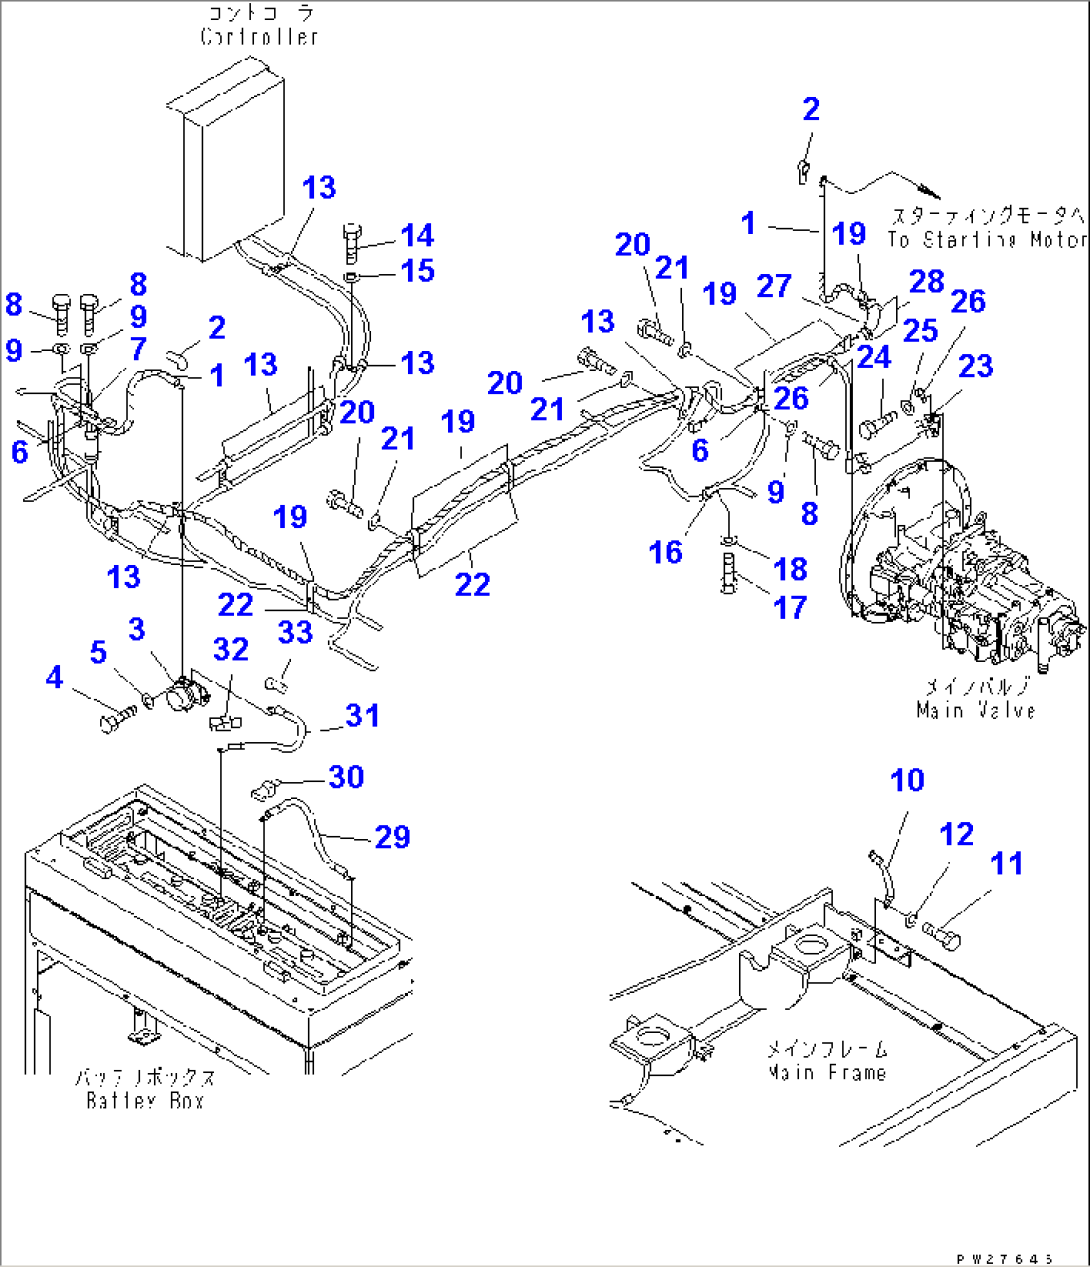 ELECTRICAL SYSTEM (3/4)